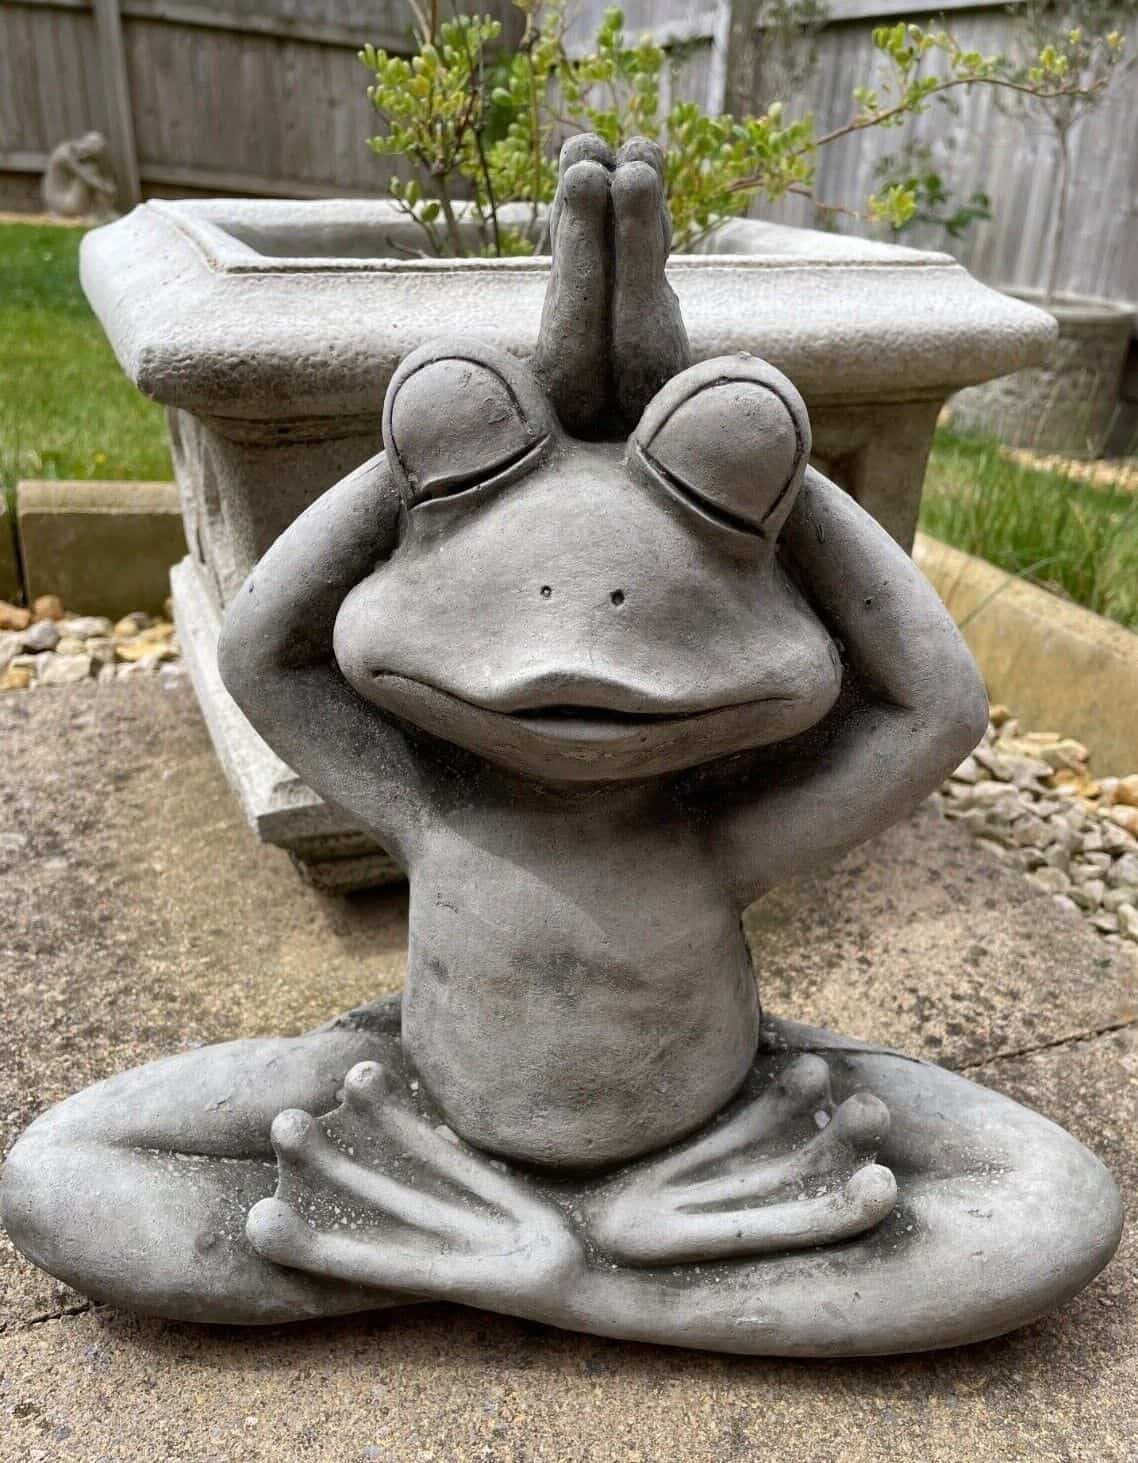 A frog sitting with back legs crossed and arms extended upwards into a yoga position. Situated in the garden of a British home